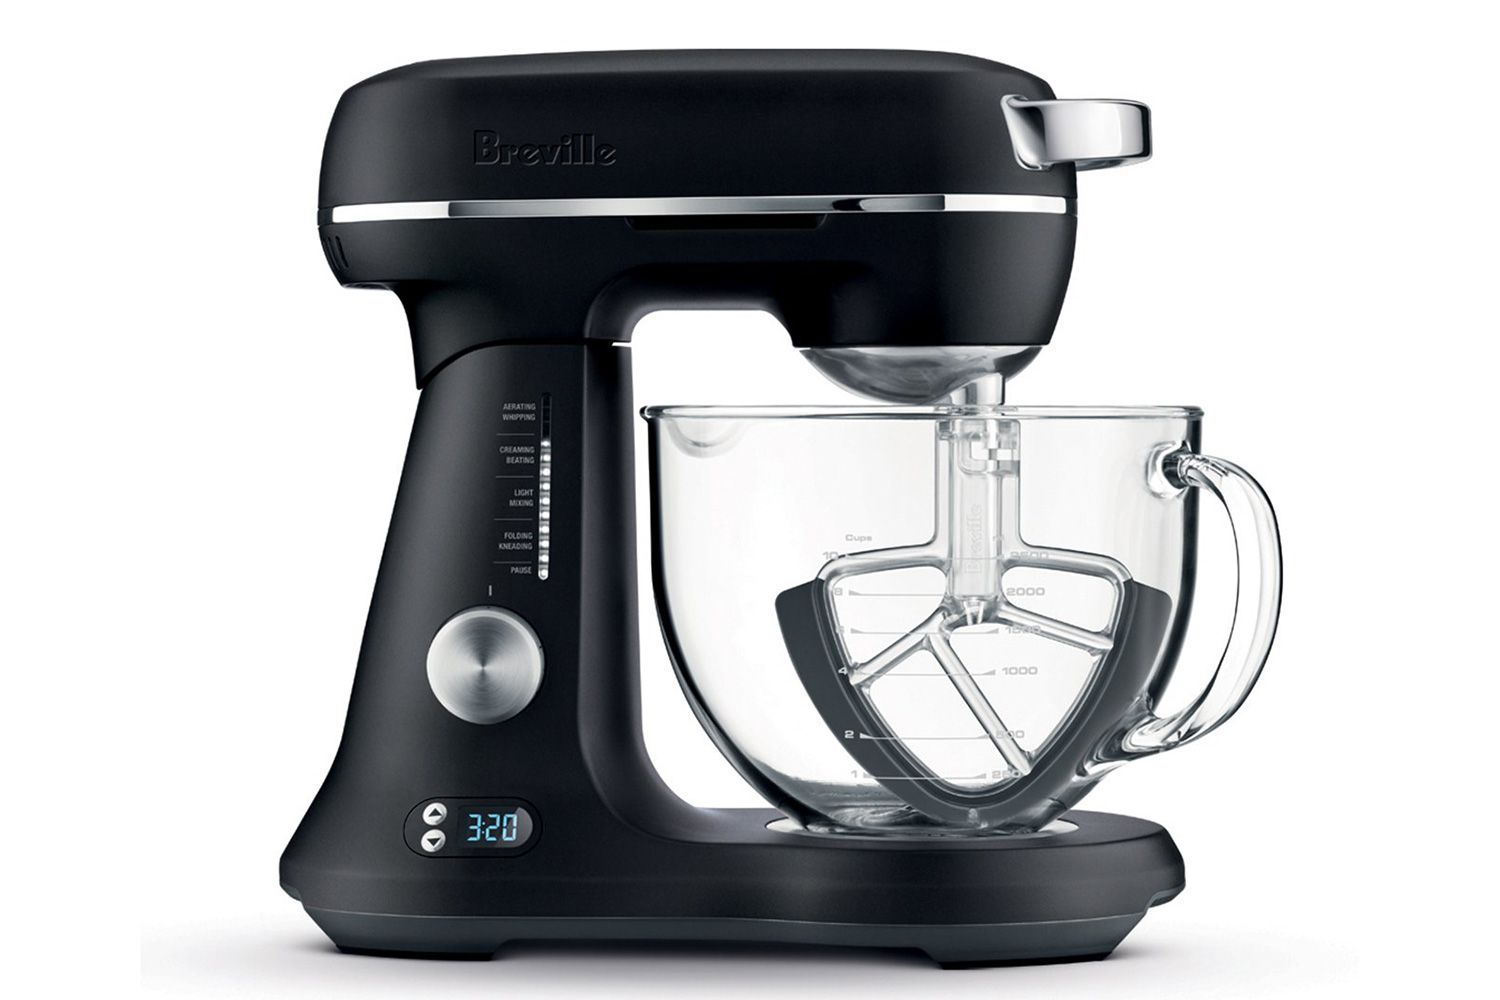 Breville Bakery Chef Stand Mixer